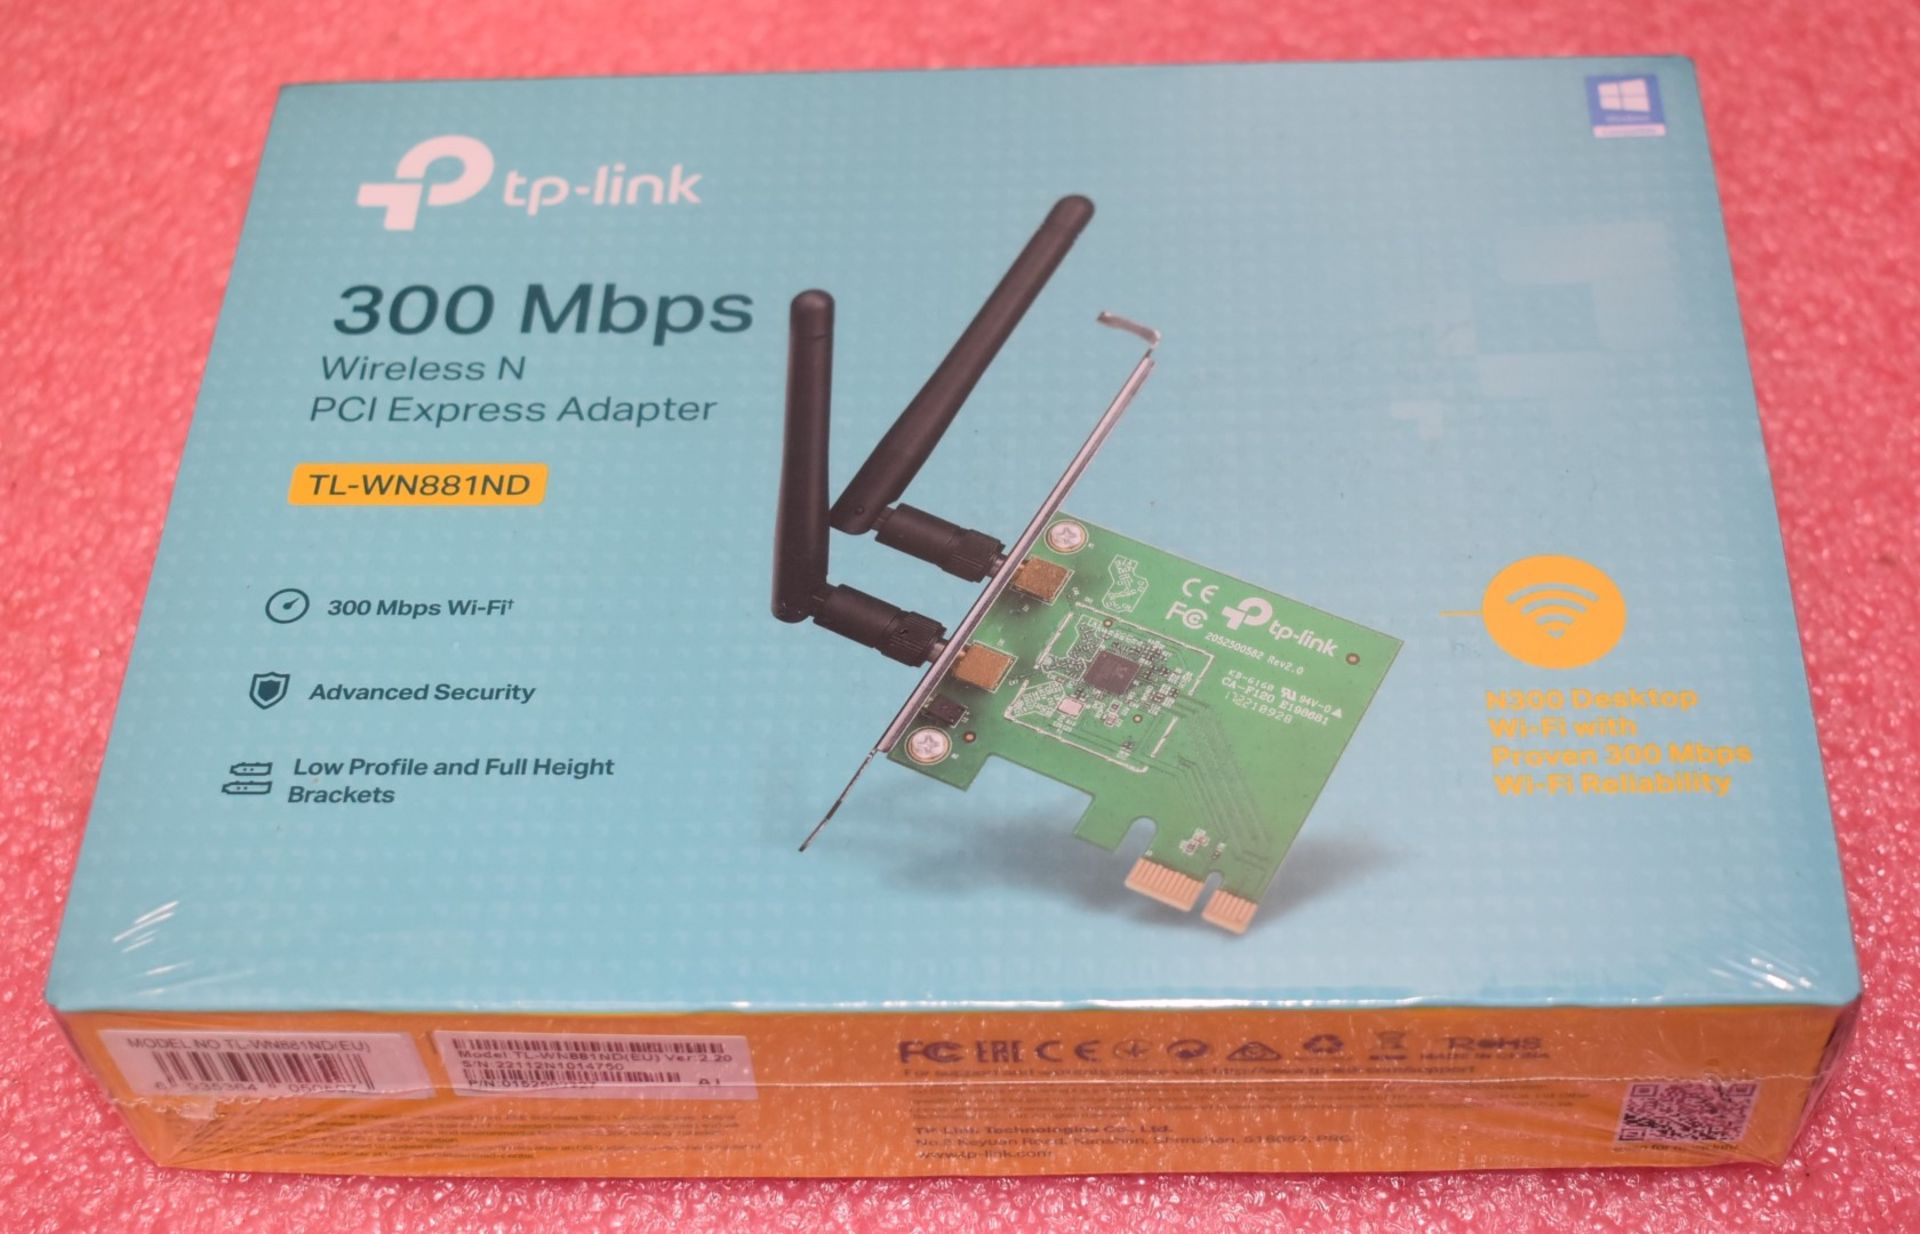 1 x TP Link 300Mbps Wireless N PCI Express Adapter - TL-WN881ND - New Sealed Stock - Image 3 of 4